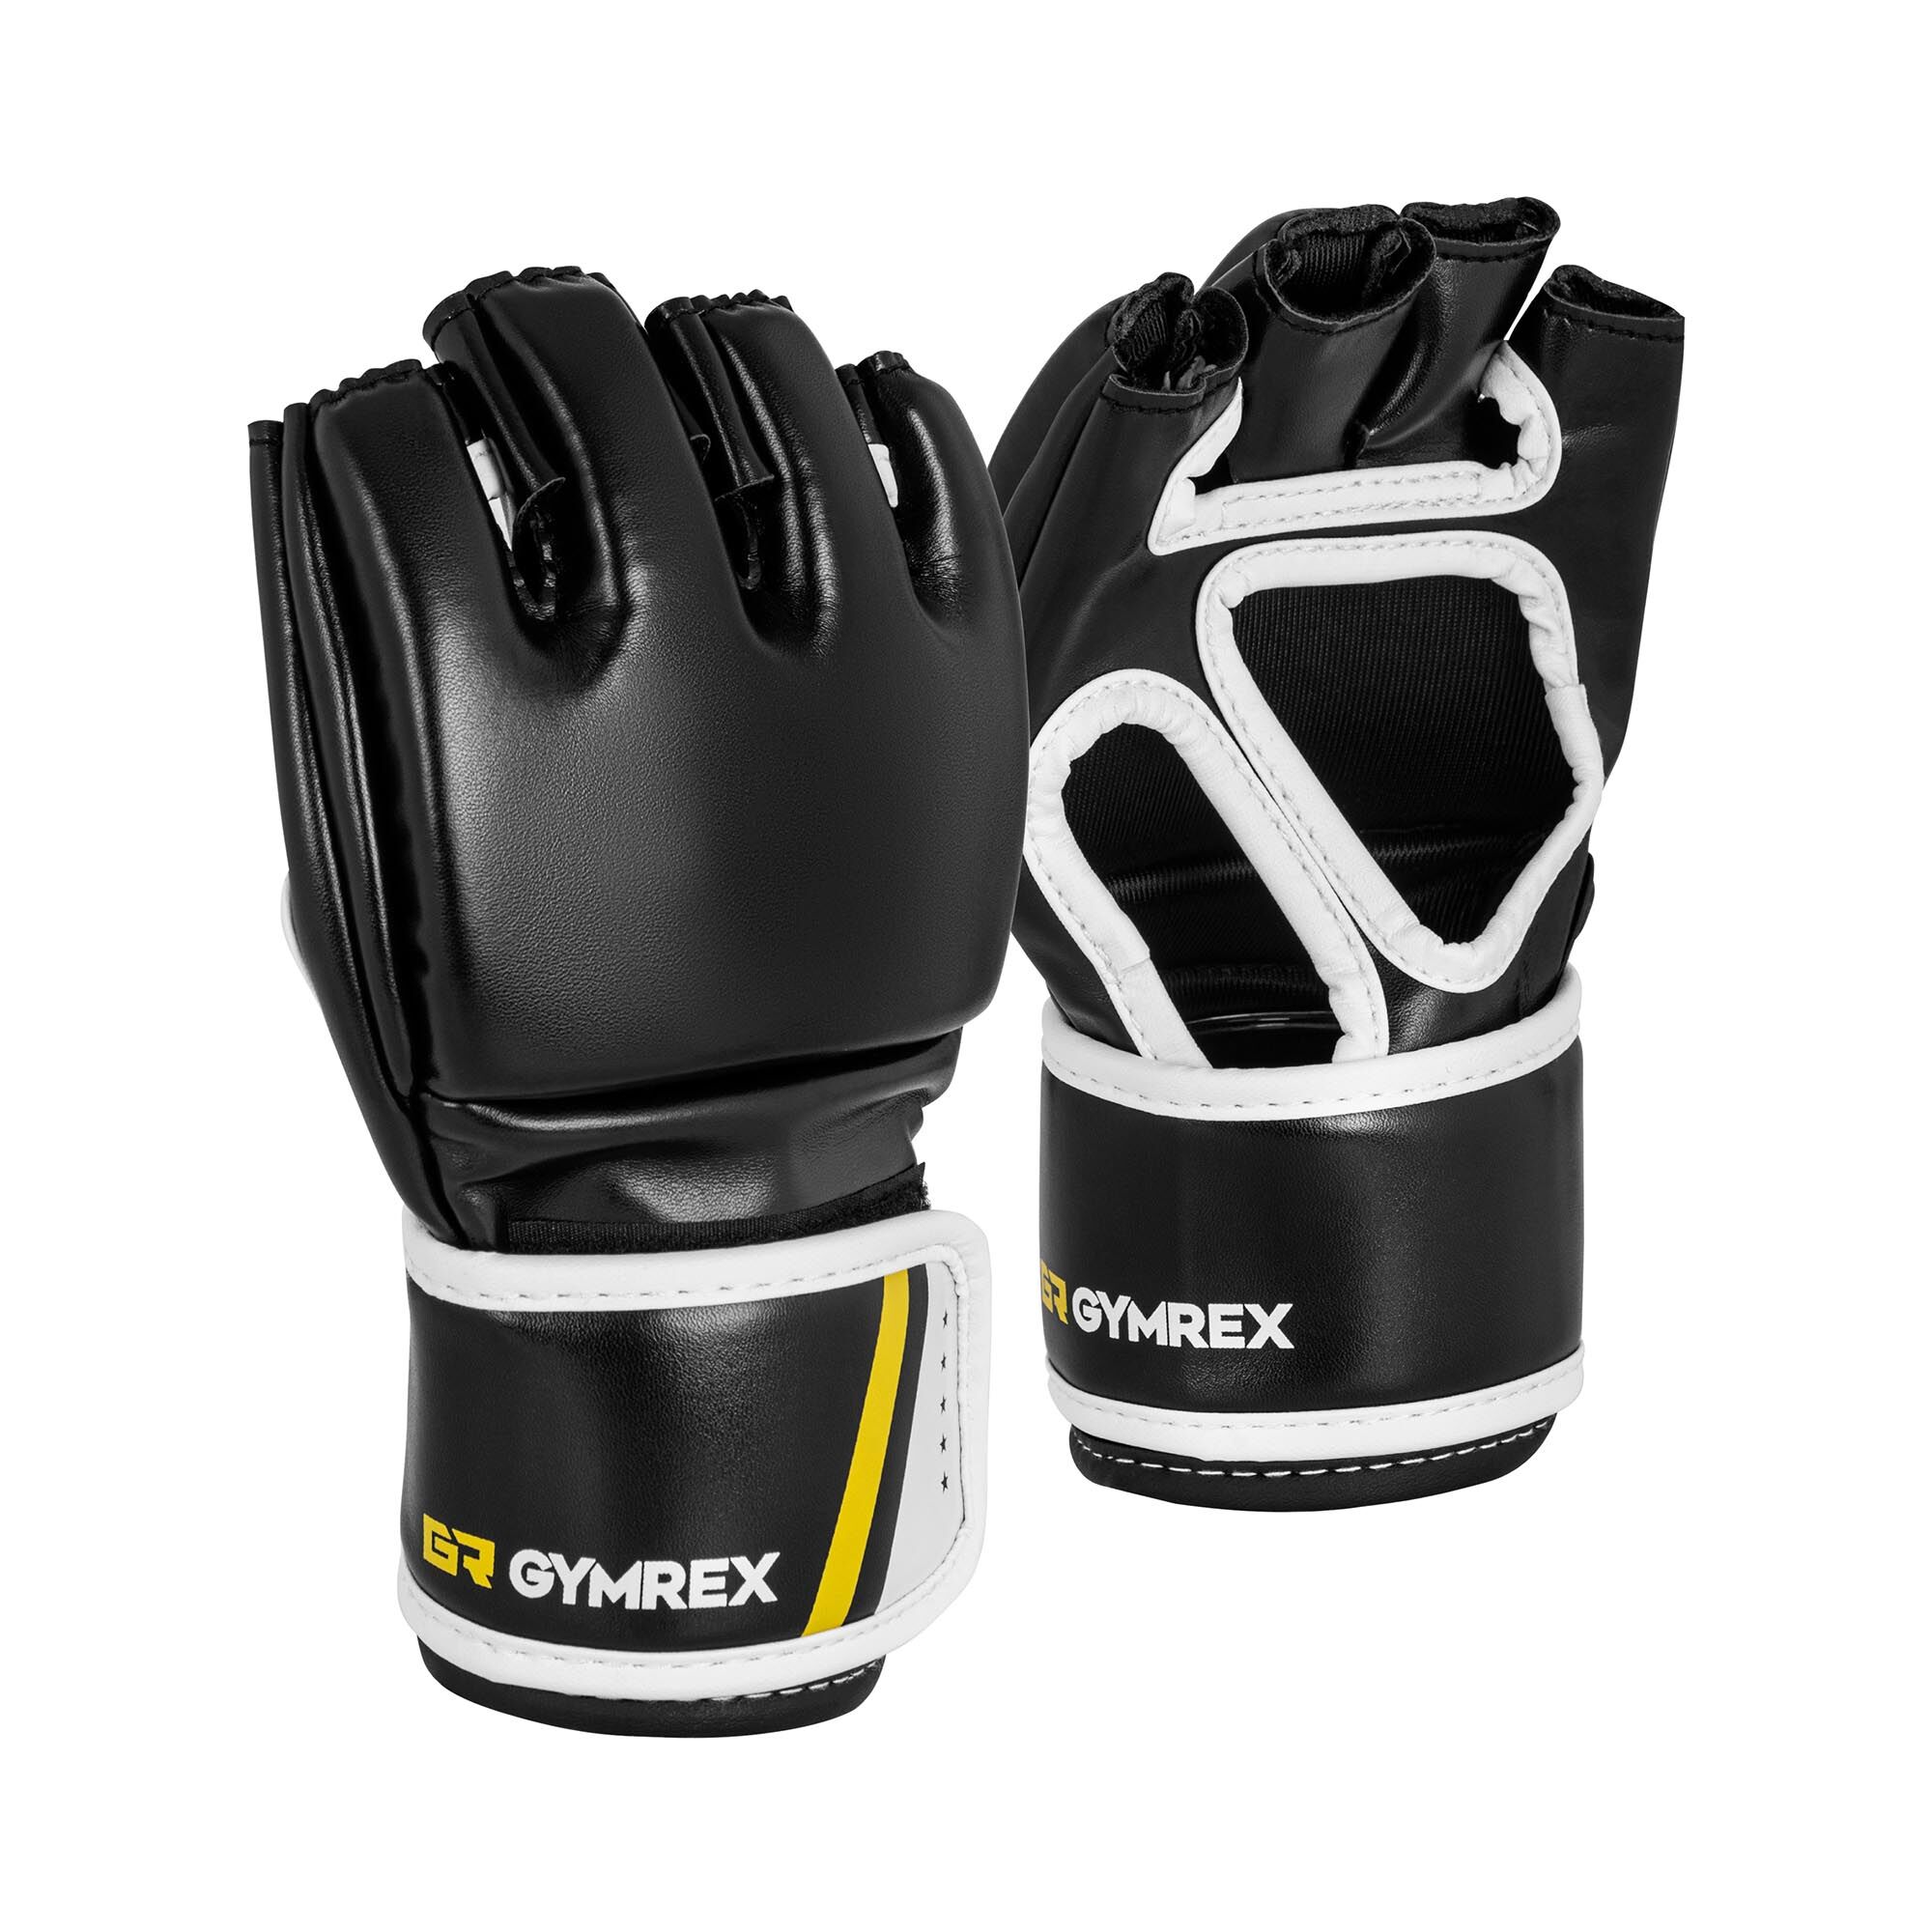 Gymrex MMA Gloves - size L/XL - black - without thumbs